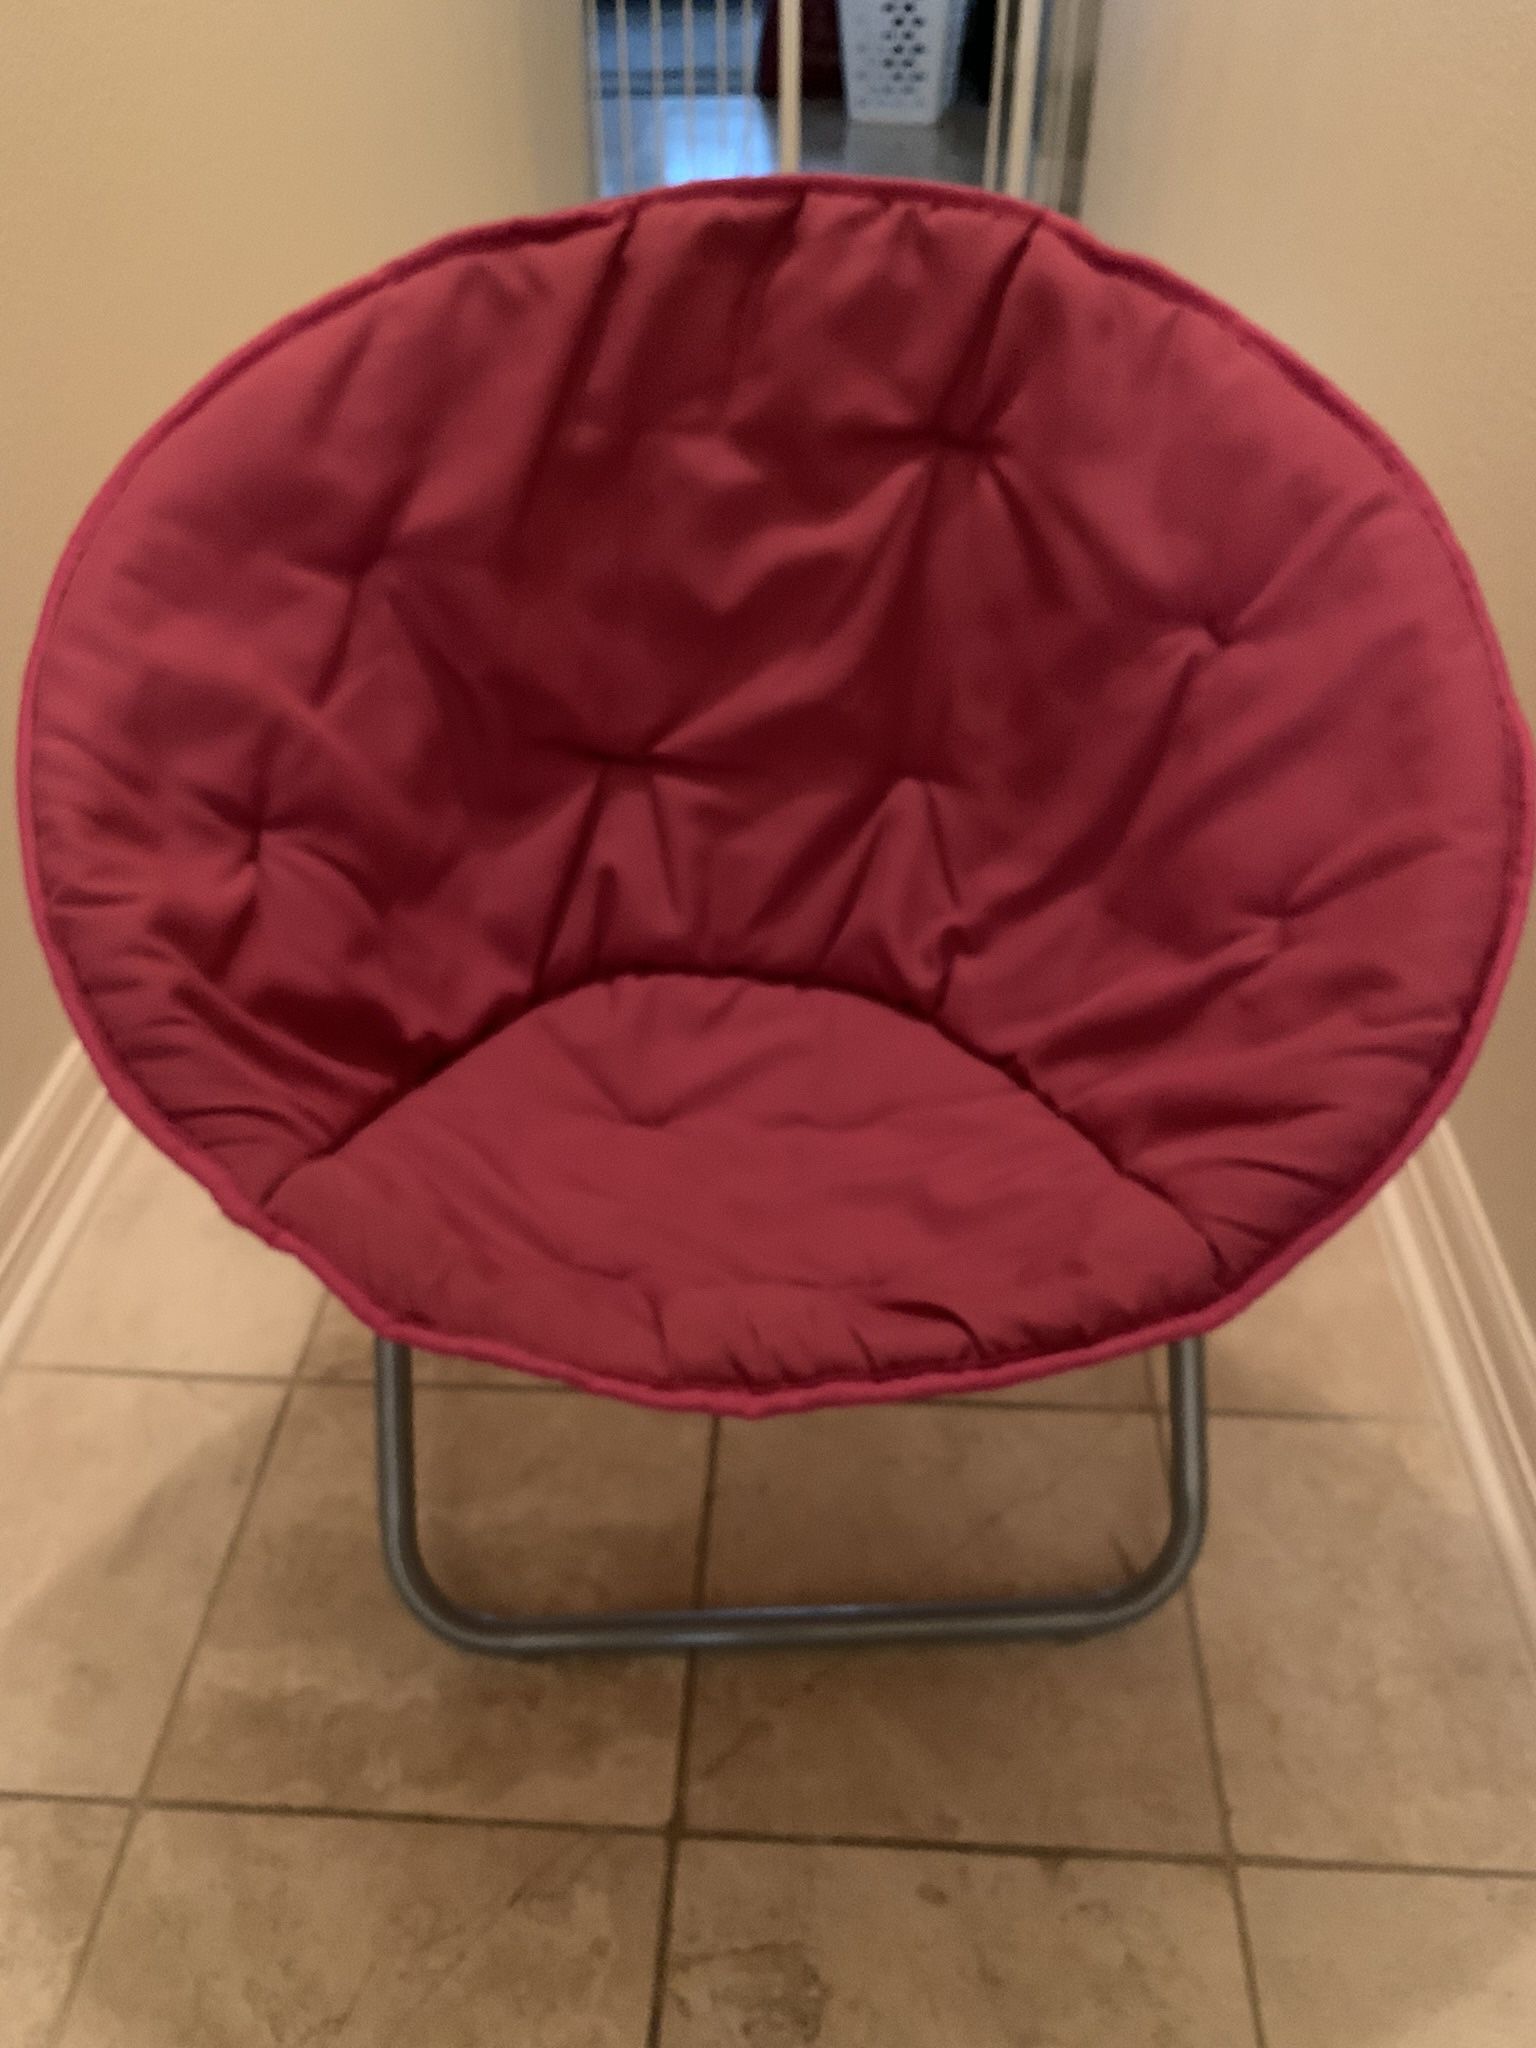 Saucer Folding Chair - Perfect For Dorm or Kid’s Room